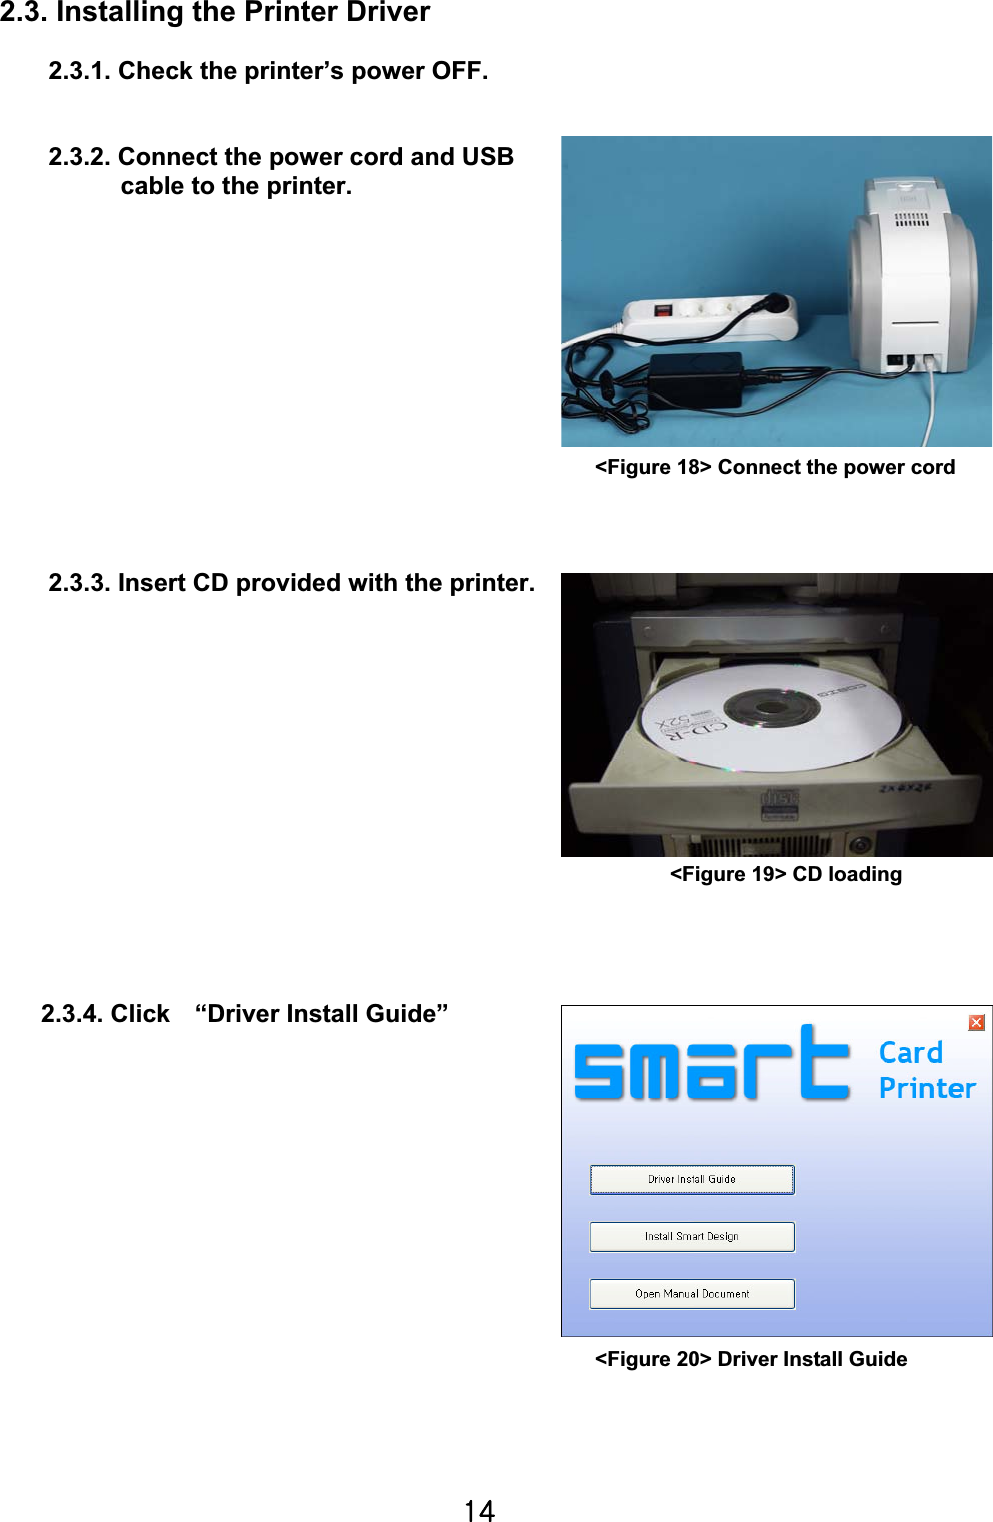 X[G2.3. Installing the Printer Driver 2.3.1. Check the printer’s power OFF. 2.3.2. Connect the power cord and USB cable to the printer. 2.3.3. Insert CD provided with the printer. 2.3.4. Click    “Driver Install Guide” &lt;Figure 18&gt; Connect the power cord &lt;Figure 20&gt; Driver Install Guide &lt;Figure 19&gt; CD loading 